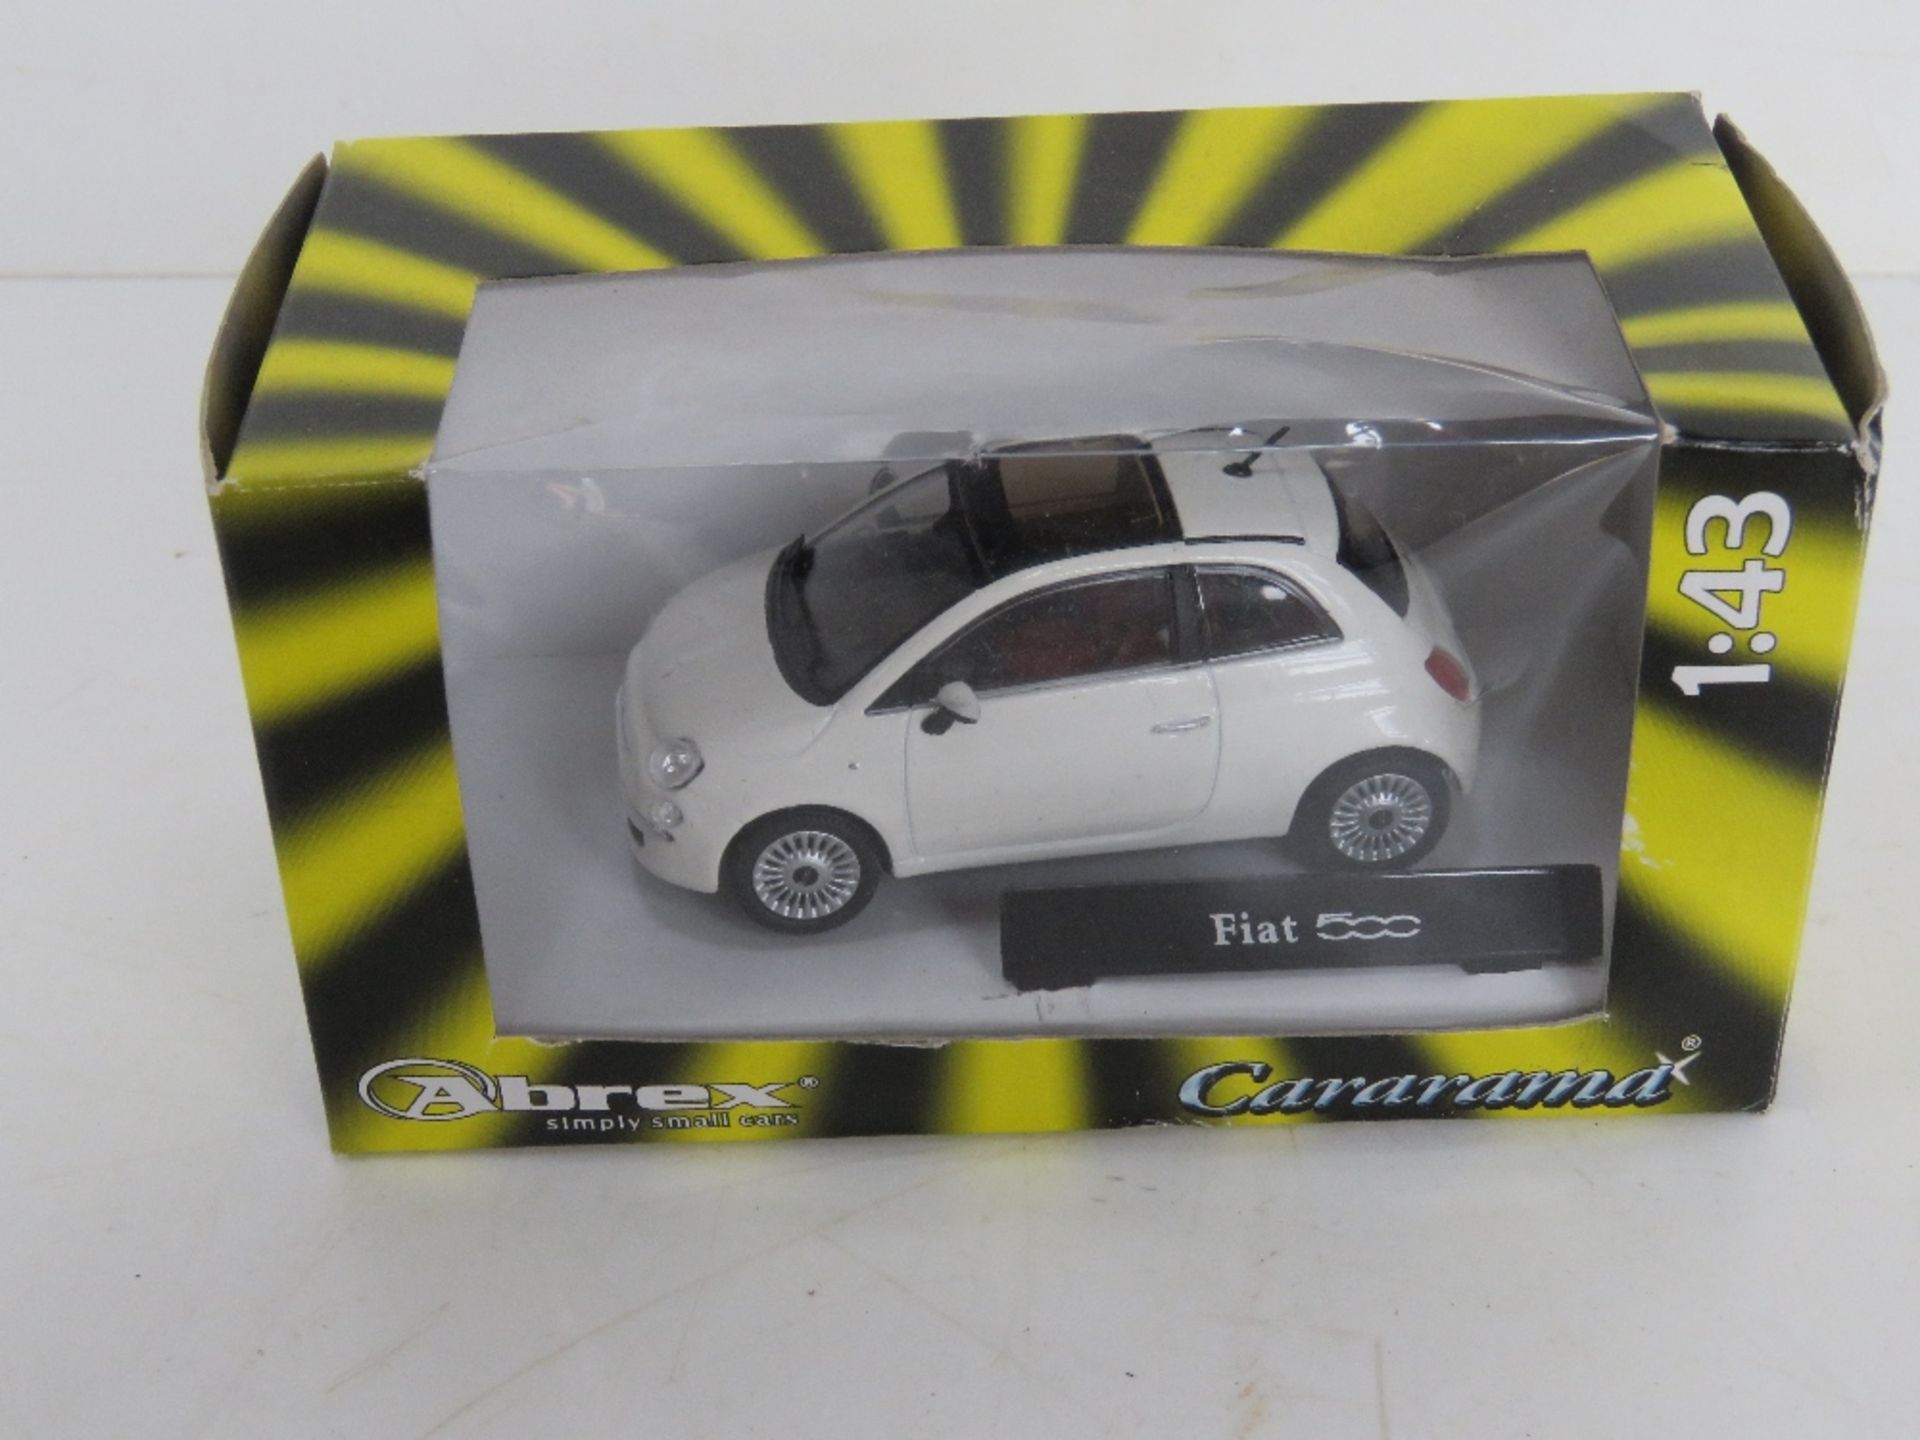 A die cast scale model Fiat 500 by Carar - Image 2 of 3